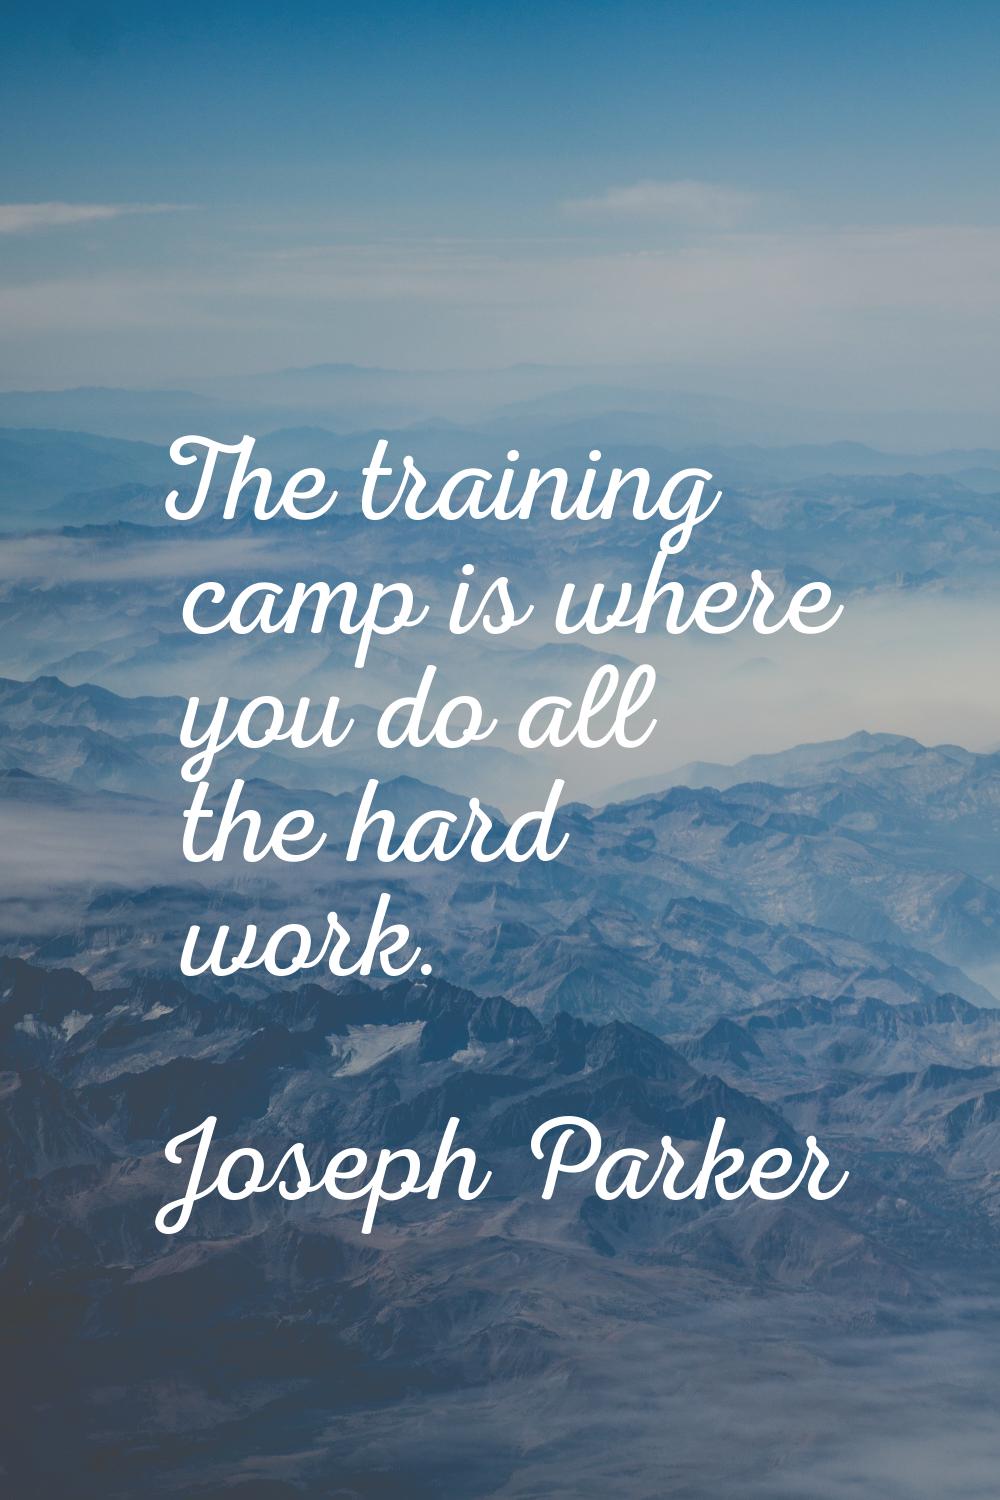 The training camp is where you do all the hard work.